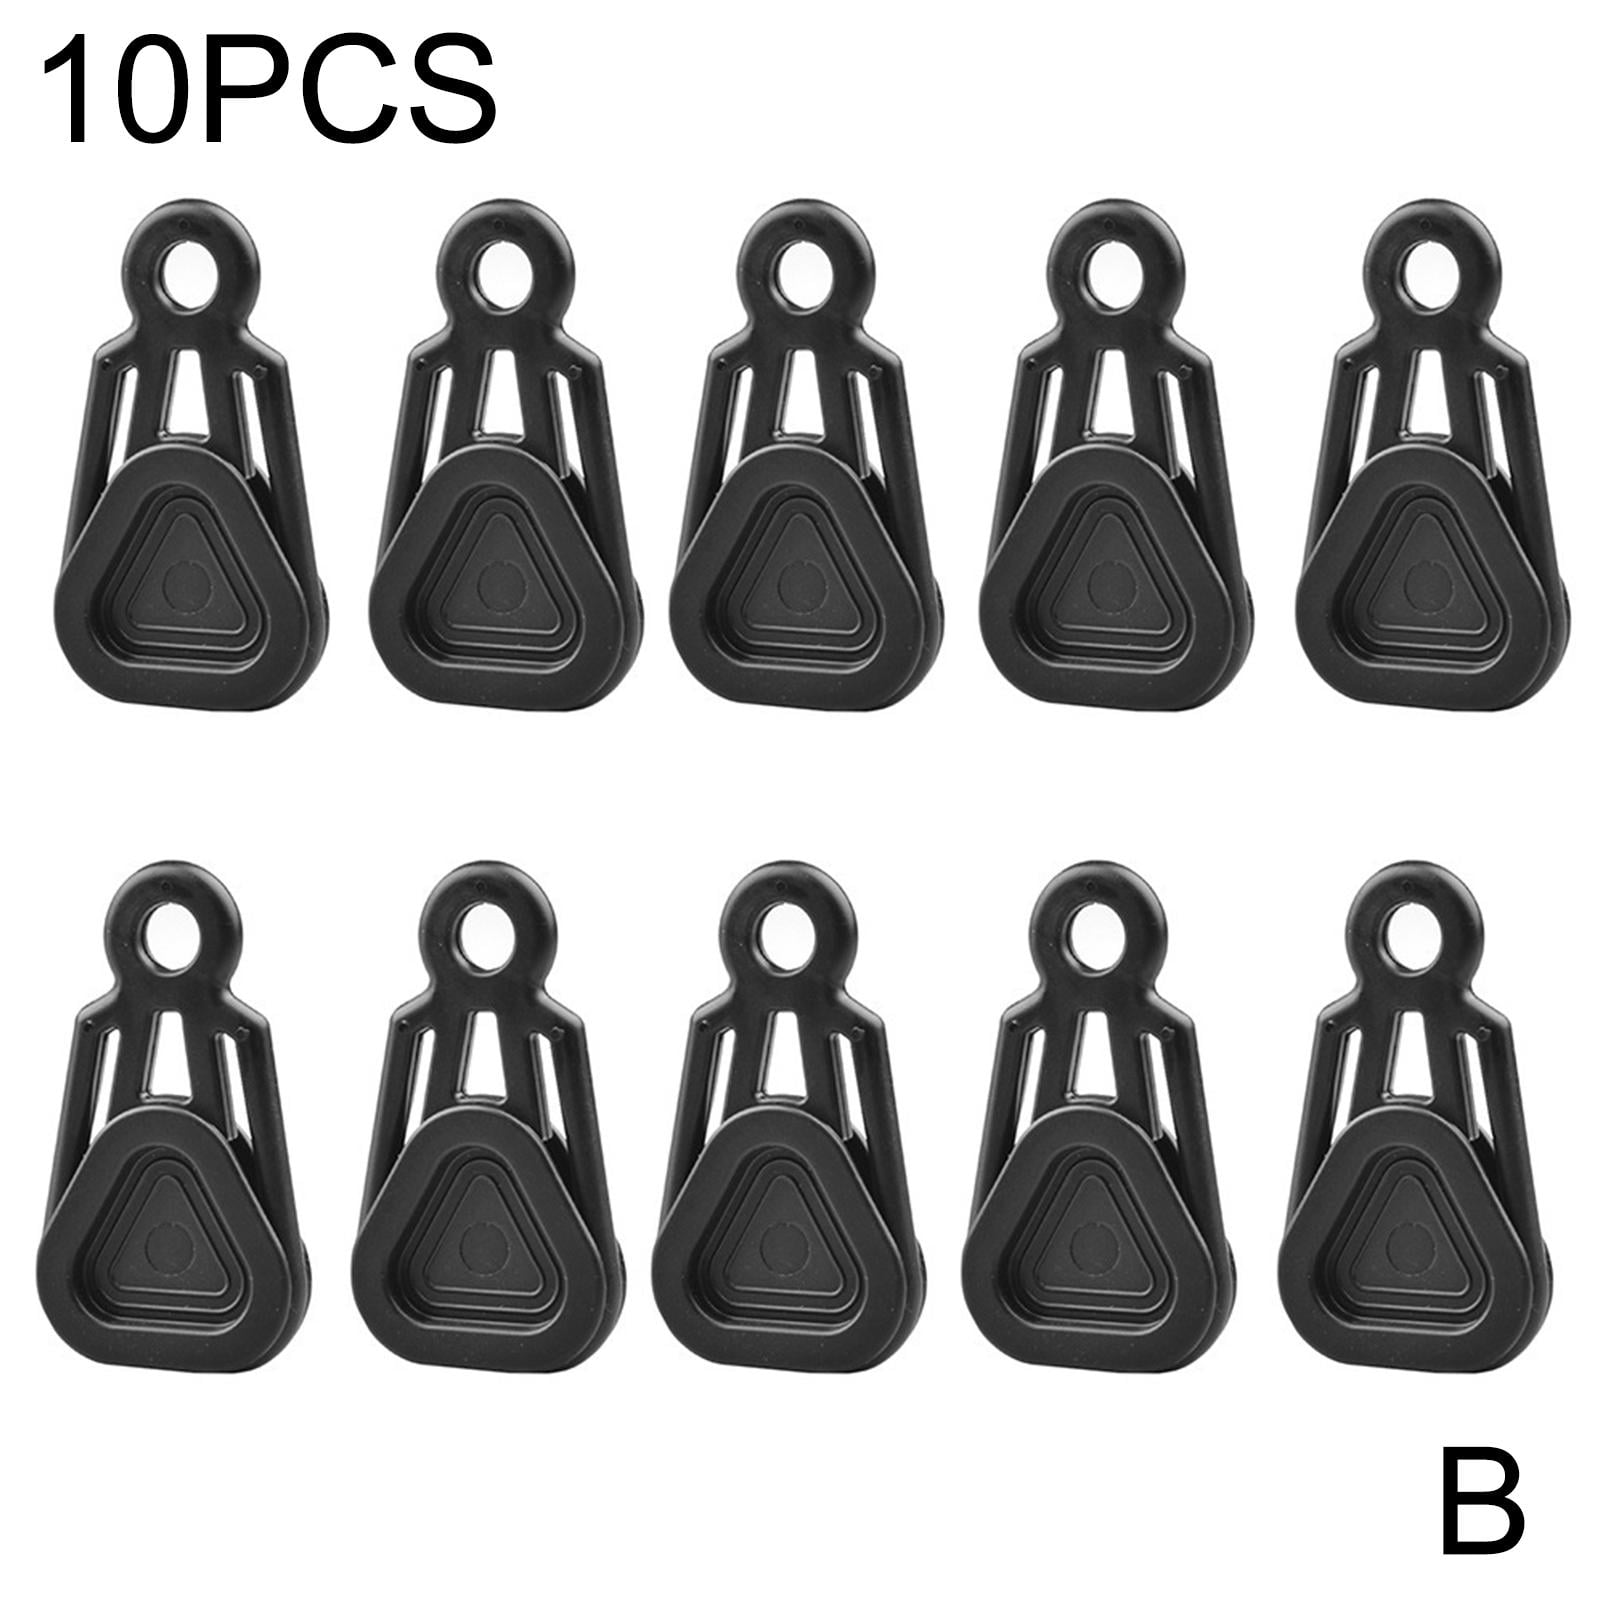 Tarp Clips Heavy Duty Lock Grip, Tent Plastic Clip Without Damaging A Hole,  1pc/10pcs Canvas Tie Down Clips for Outdoor Camping, Tent, Awning, Banner,  Cover, Tarps,Pool and Plastic Sheeting D2T6 